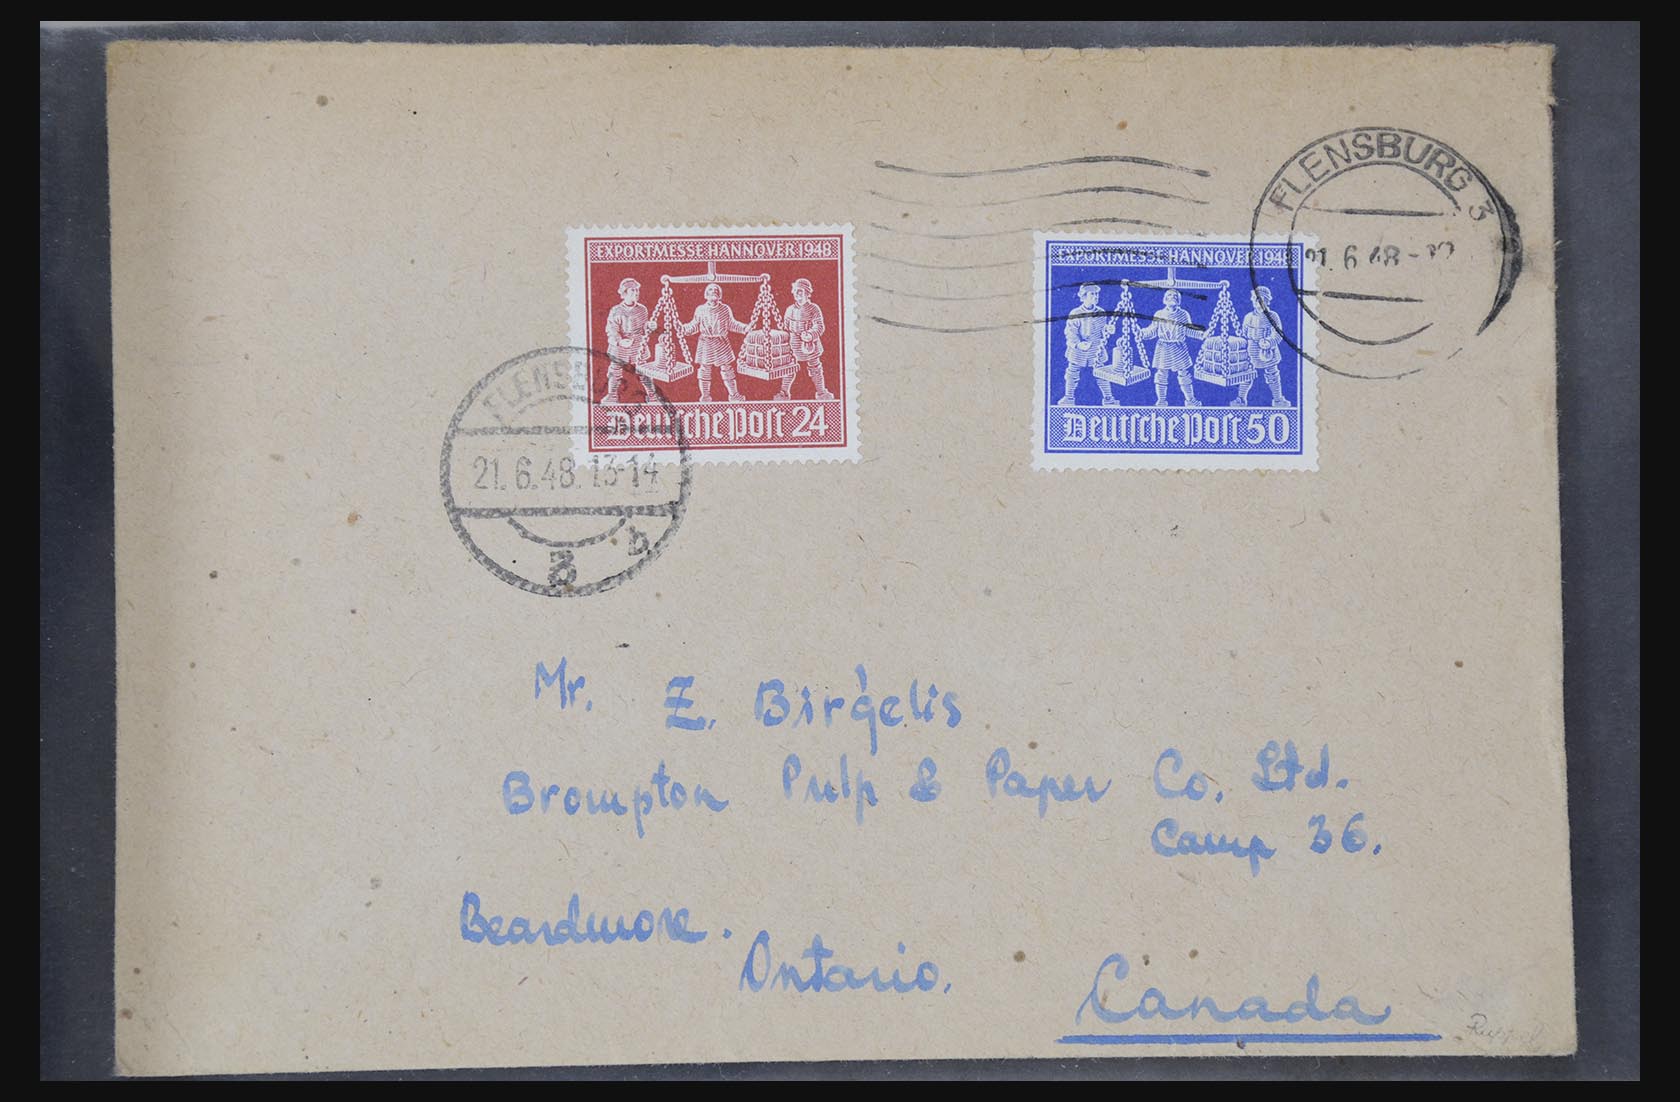 31581 007 - 31581 Germany covers and FDC's 1945-1981.